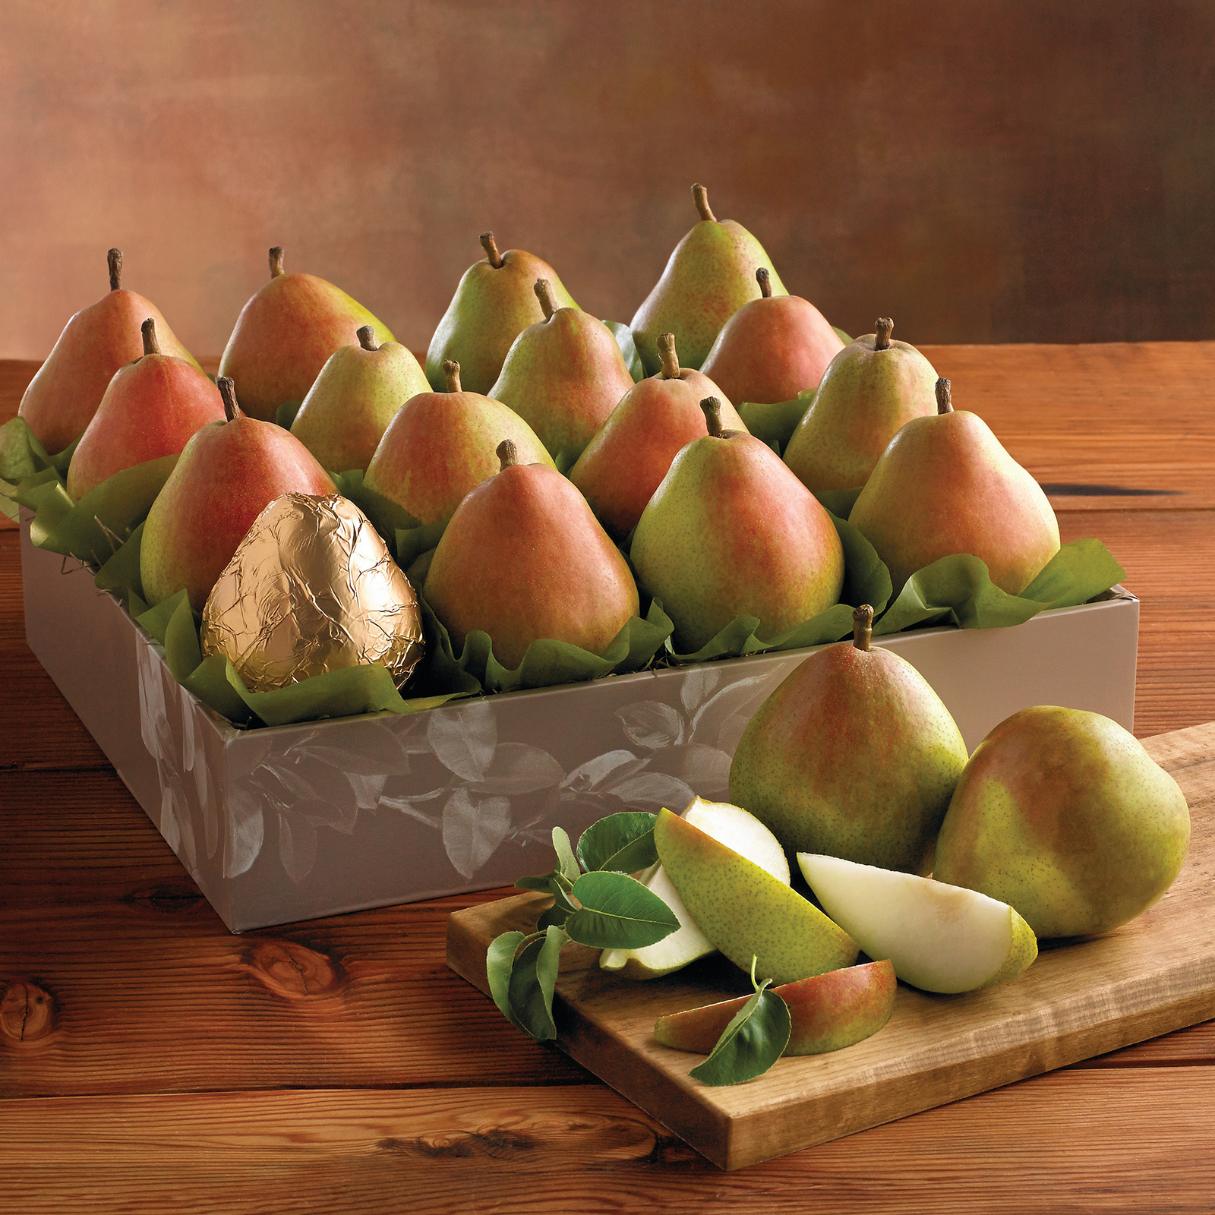 How To Store Harry And David Pears